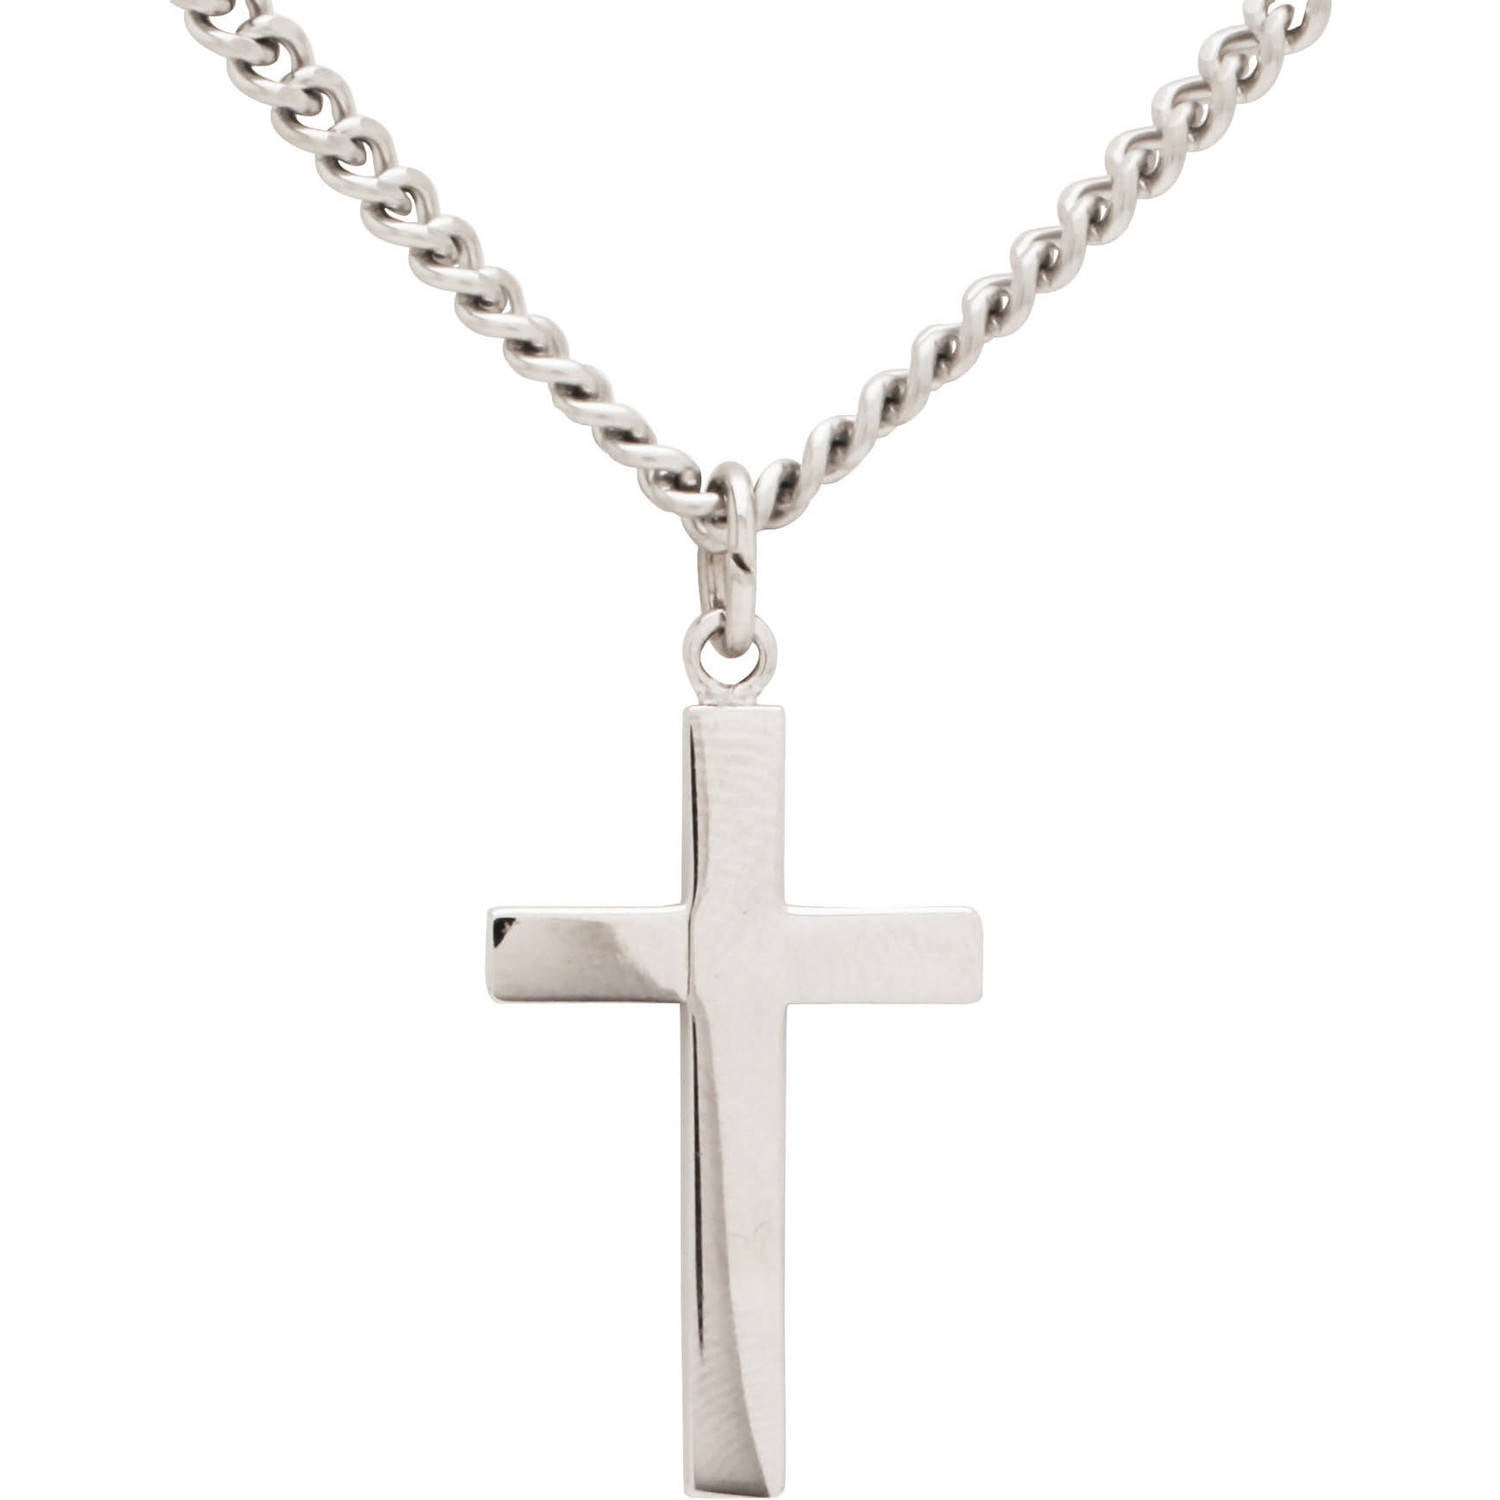 Mens Womens Stainless Steel Figaro Chain Necklace w Cross Pendant Silver Gold BK